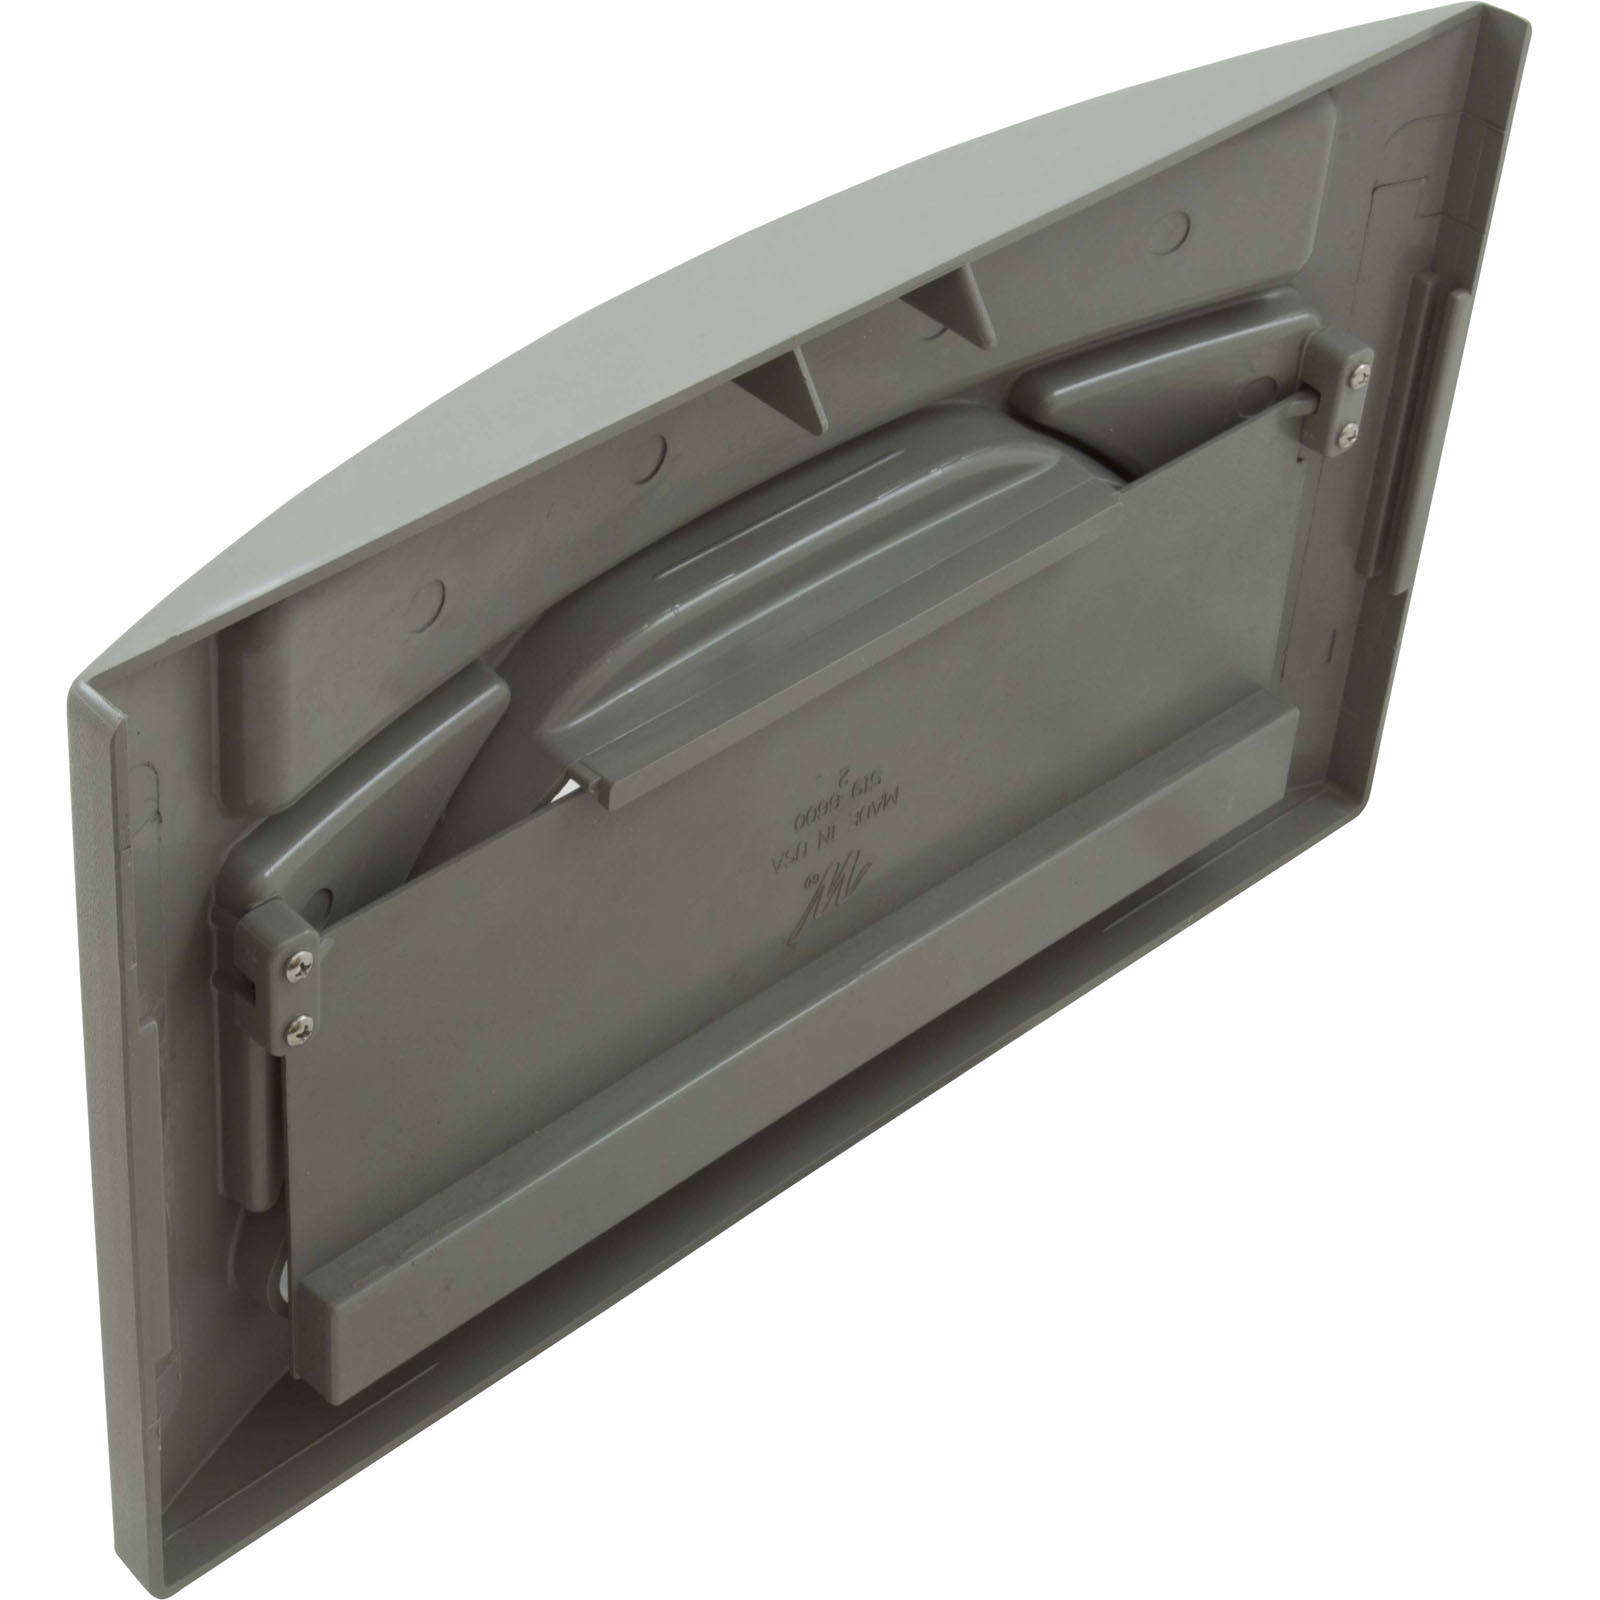 FRONT PLATE ASSY,WW FRONT ACCESS SKIMMER 100SQFT,OVAL,GRAY | 550-6637